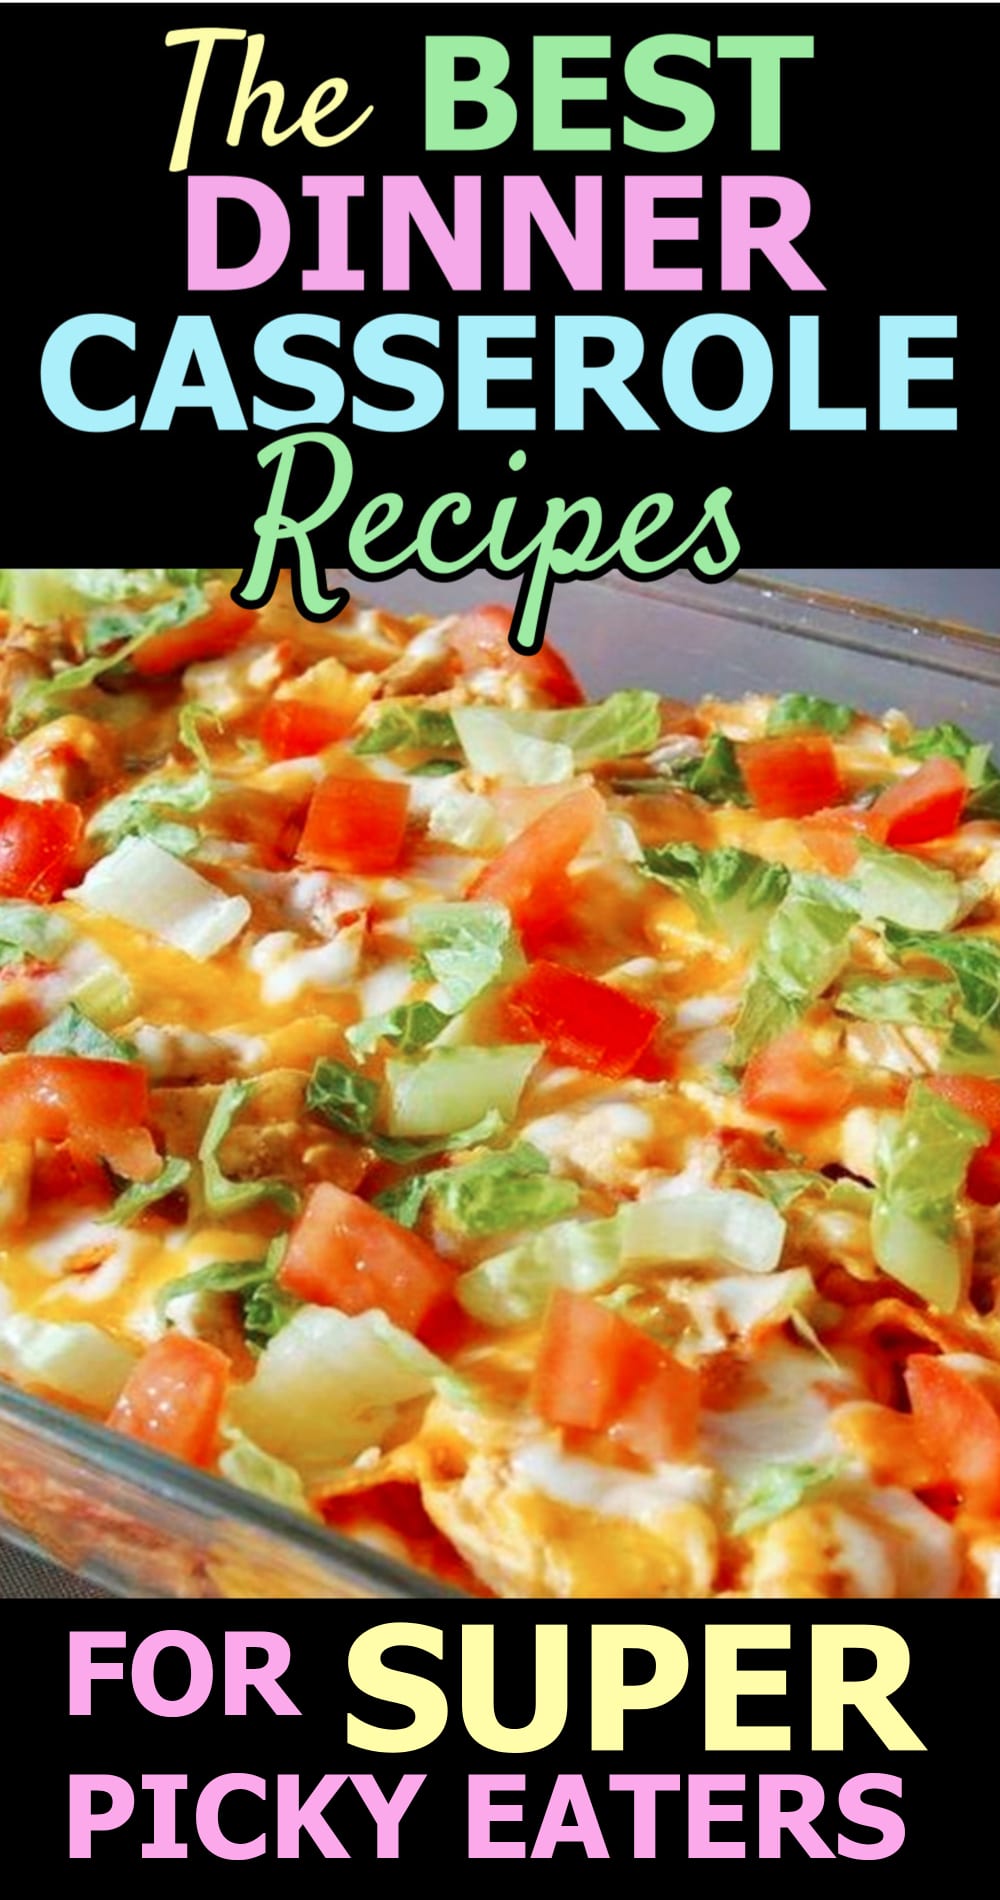 super easy casseroles for picky eaters adults AND kids to eat